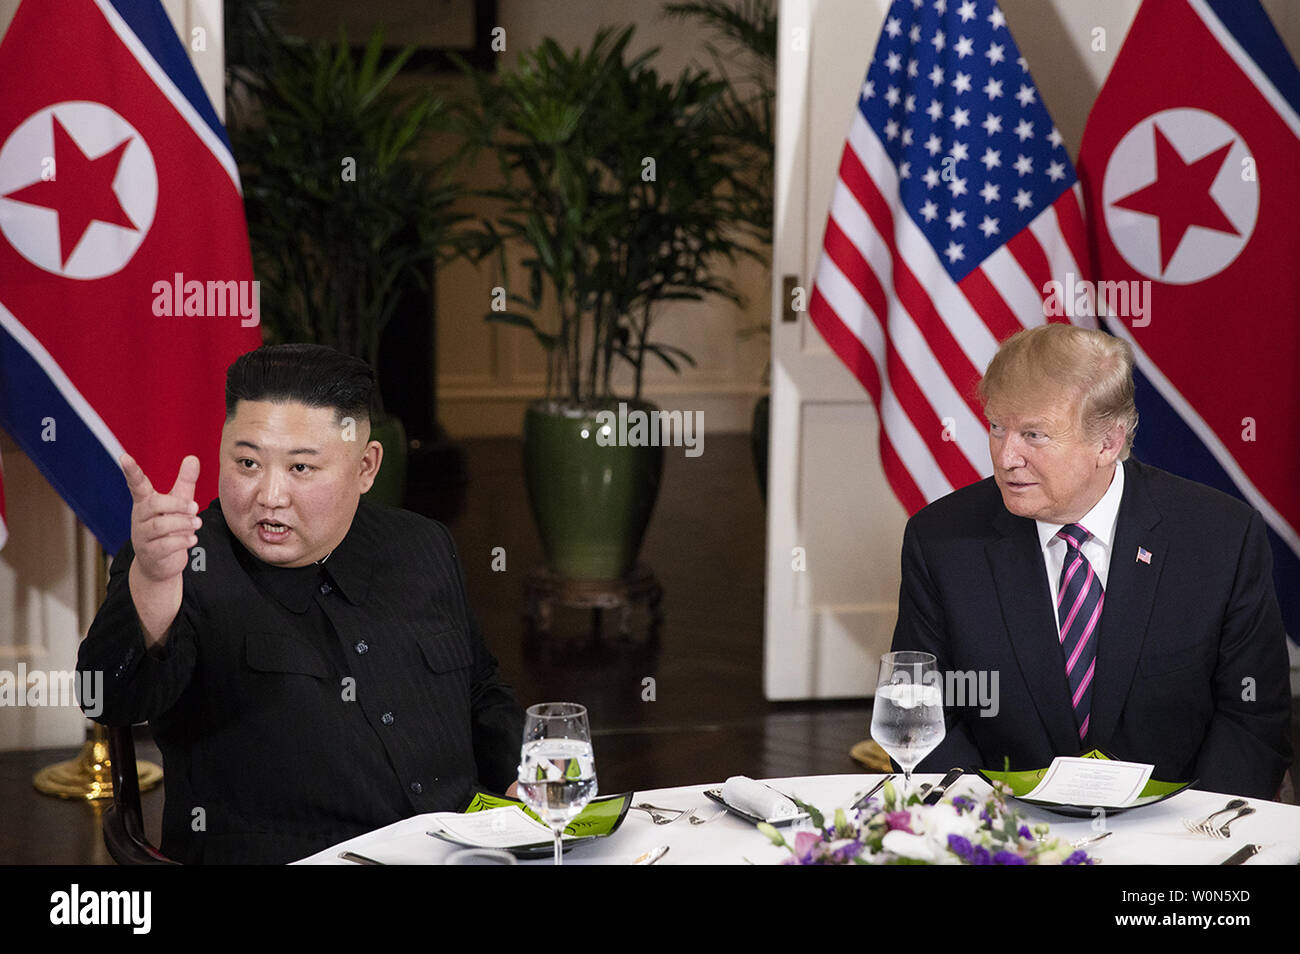 President Donald J. Trump and Kim Jong Un, Chairman of the State Affairs Commission of the Democratic People’s Republic of Korea meet for a social dinner, on February 27, 2019, at the Sofitel Legend Metropole hotel in Hanoi, for their second summit meeting. White House Photo by Joyce N. Boghosian/UPI Stock Photo